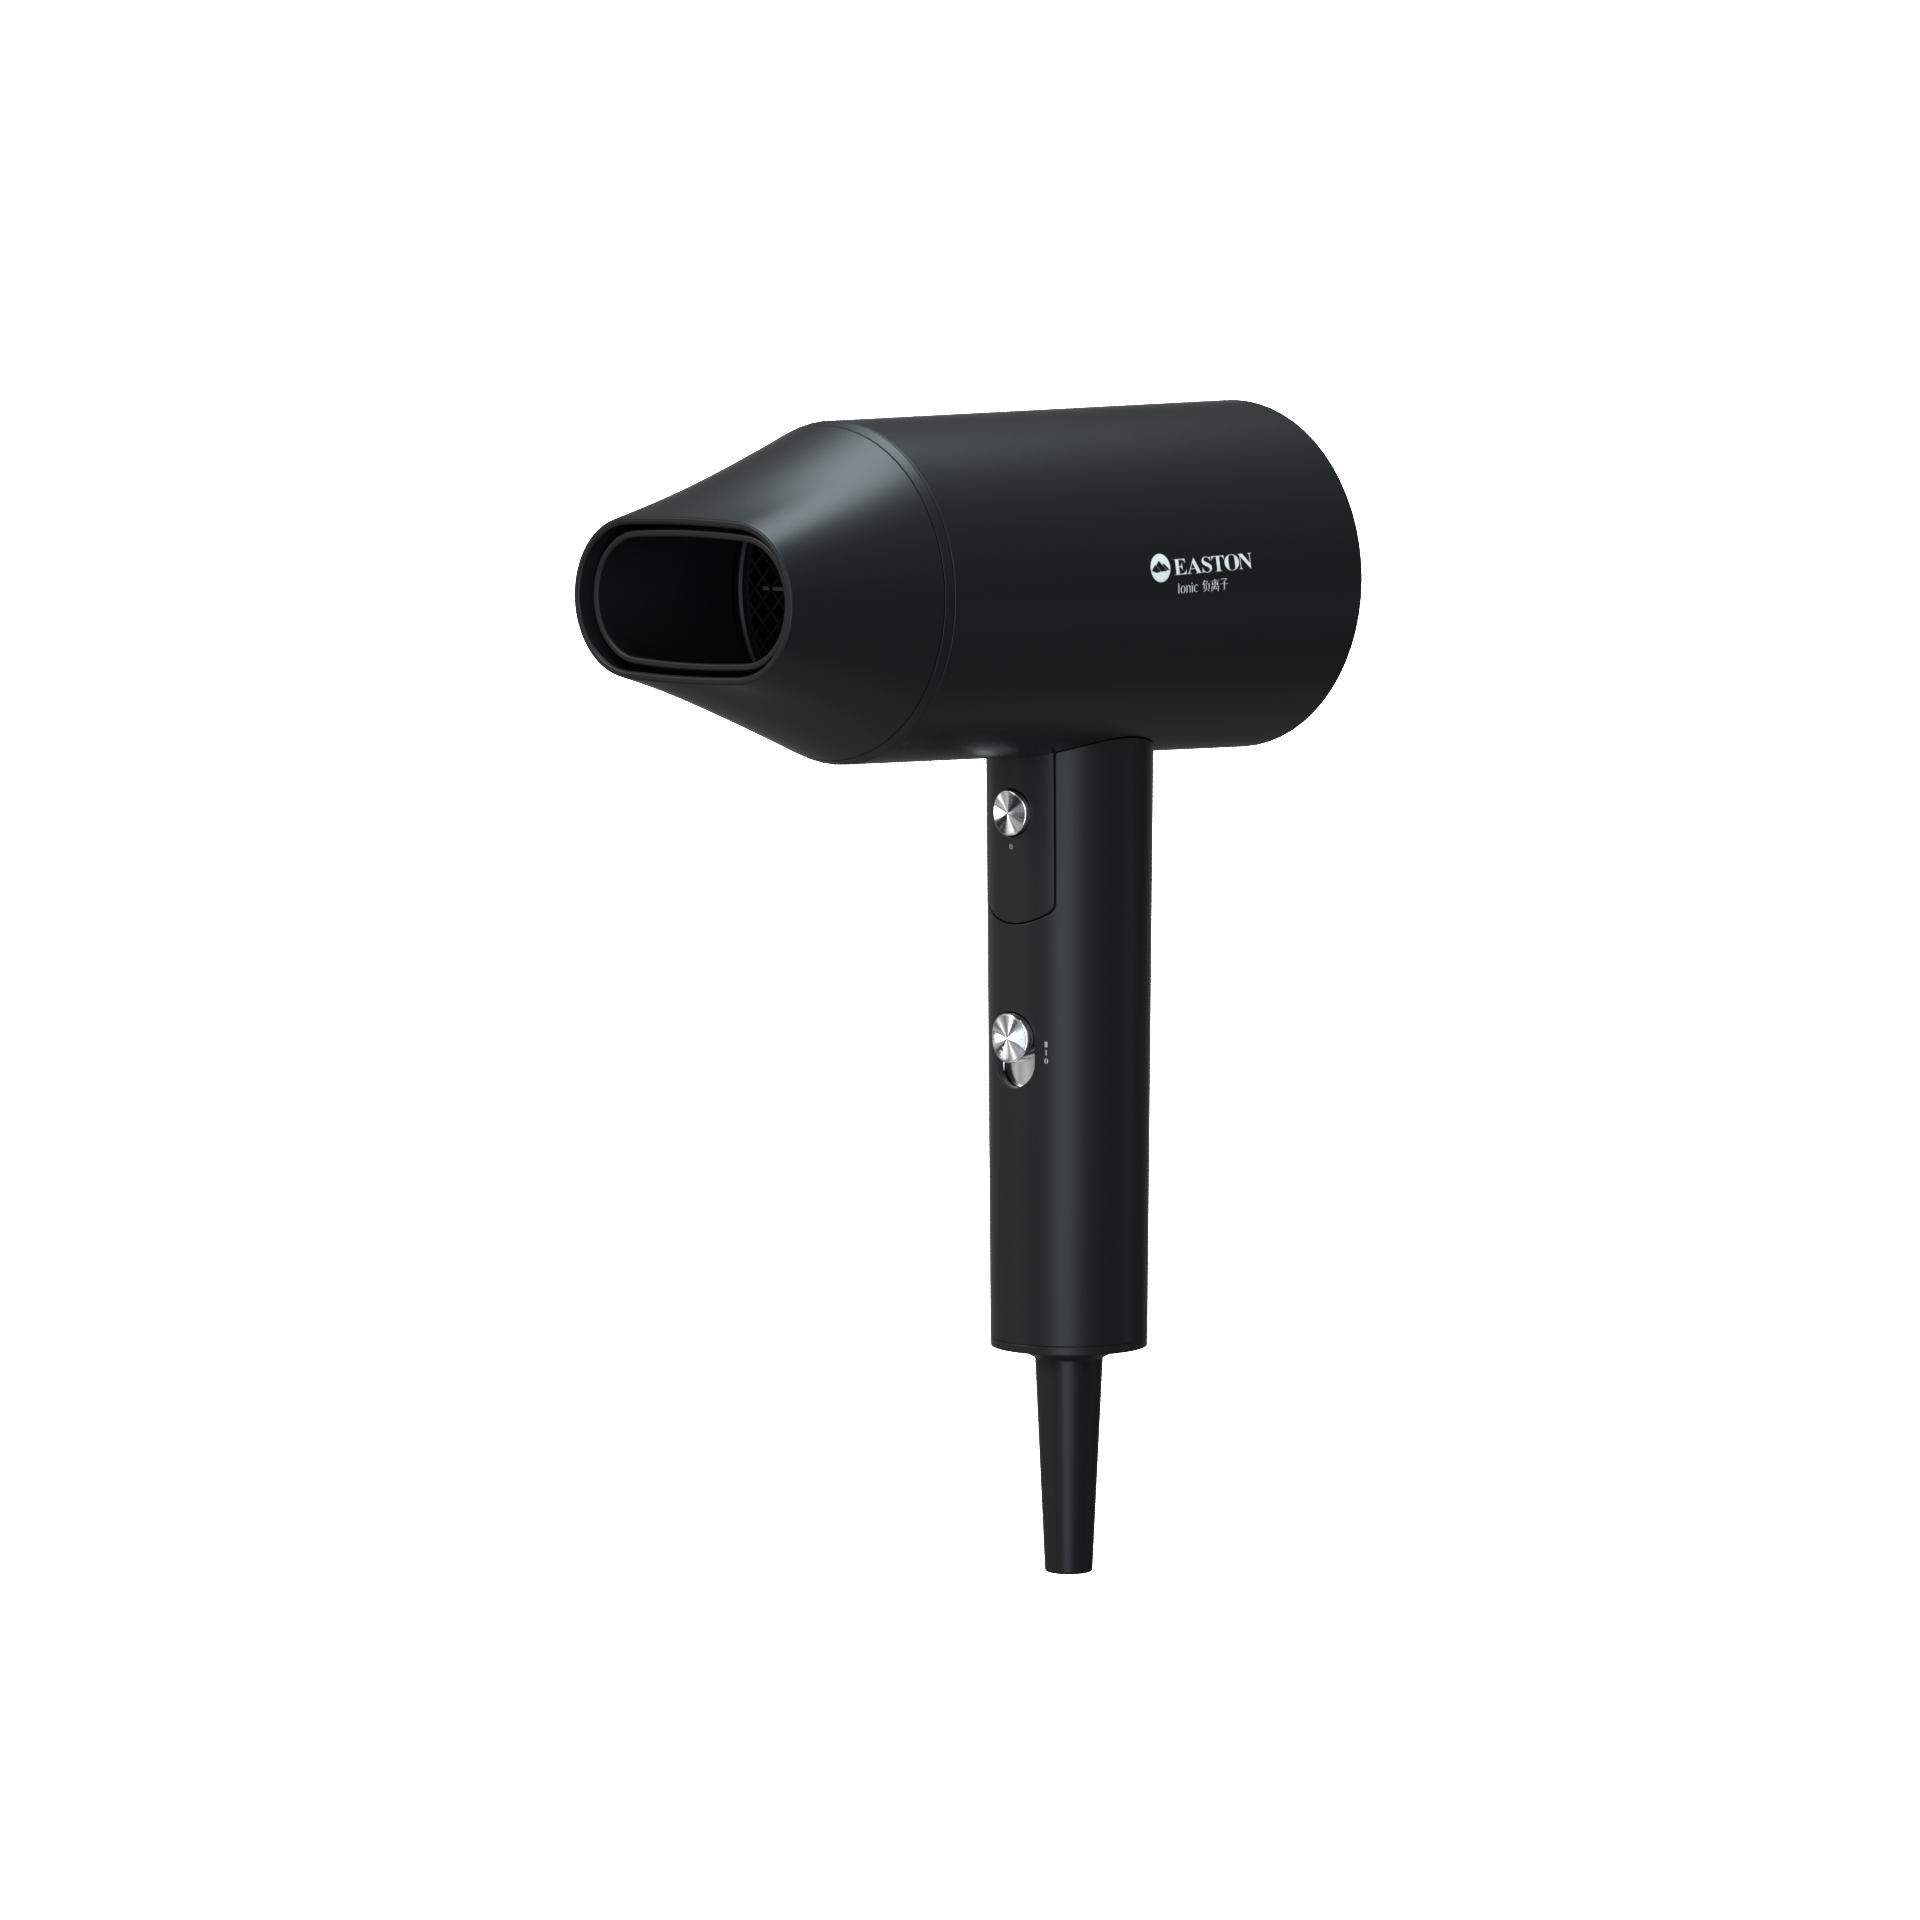 Folding Hair Dryer for High-end Hotels